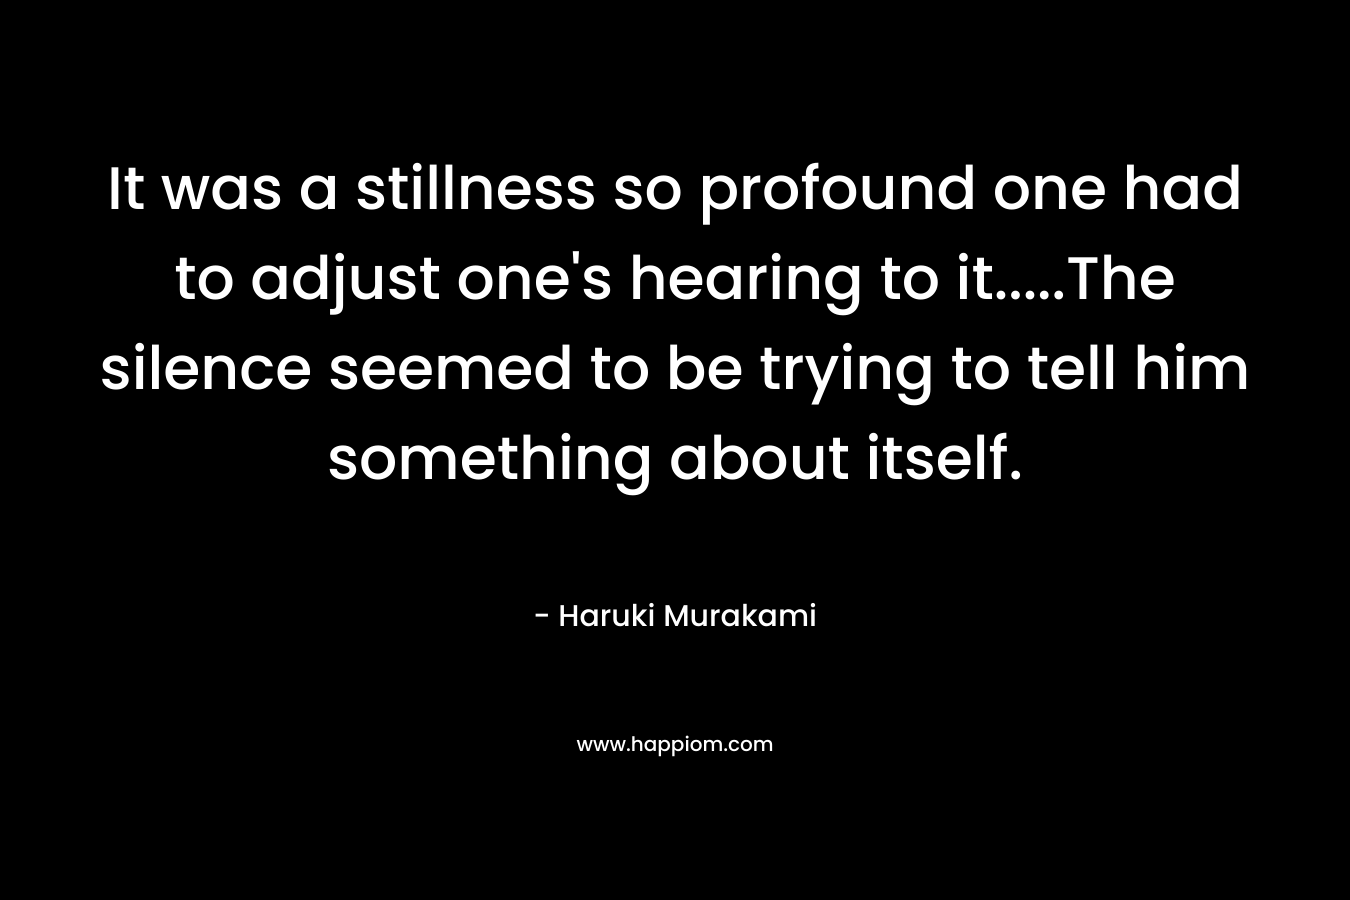 It was a stillness so profound one had to adjust one’s hearing to it…..The silence seemed to be trying to tell him something about itself. – Haruki Murakami